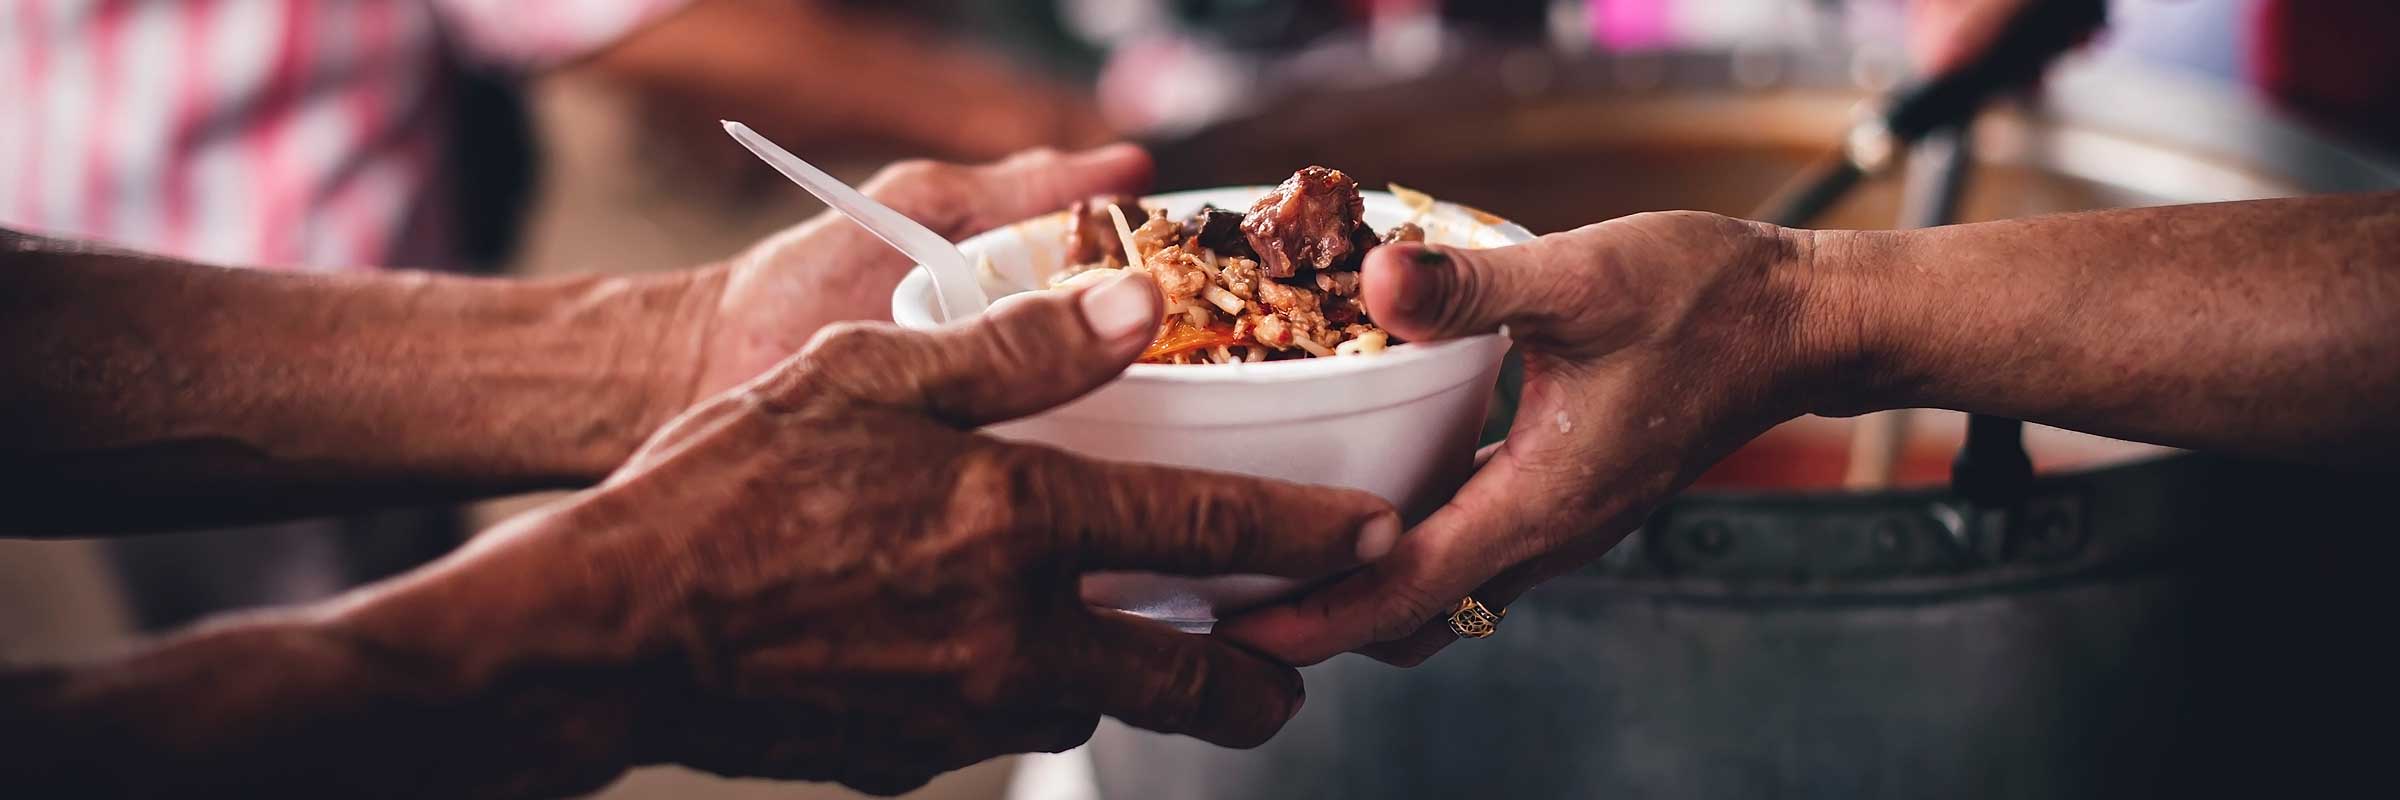 Volunteers handing out food to hungry people